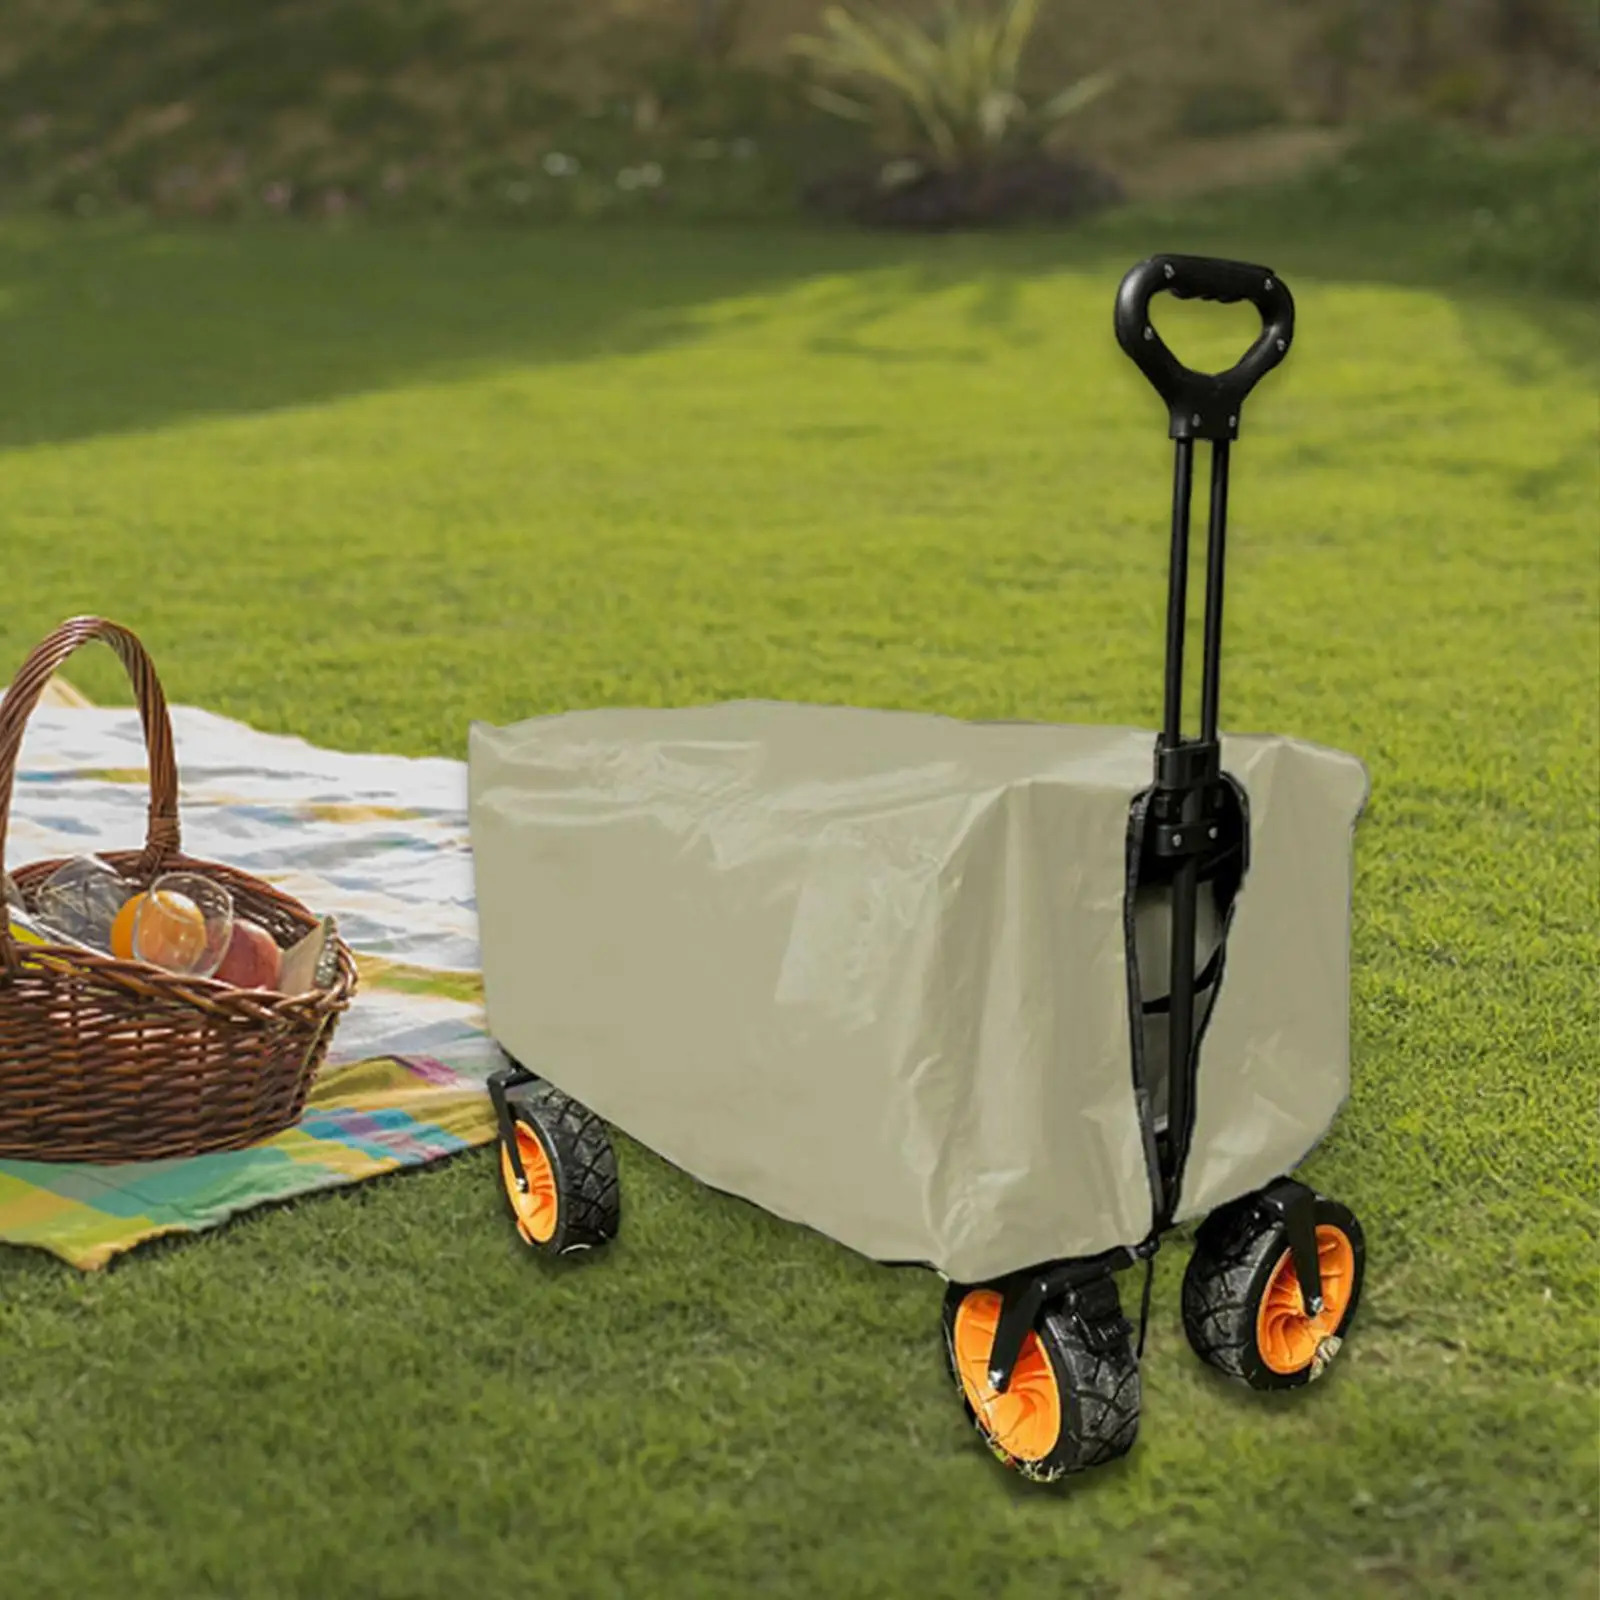 Garden Wagon Cart Cover Dustproof Cover 90x50x45cm Accessories Durable Easily Install Windproof for Collapsible Wagon Carts